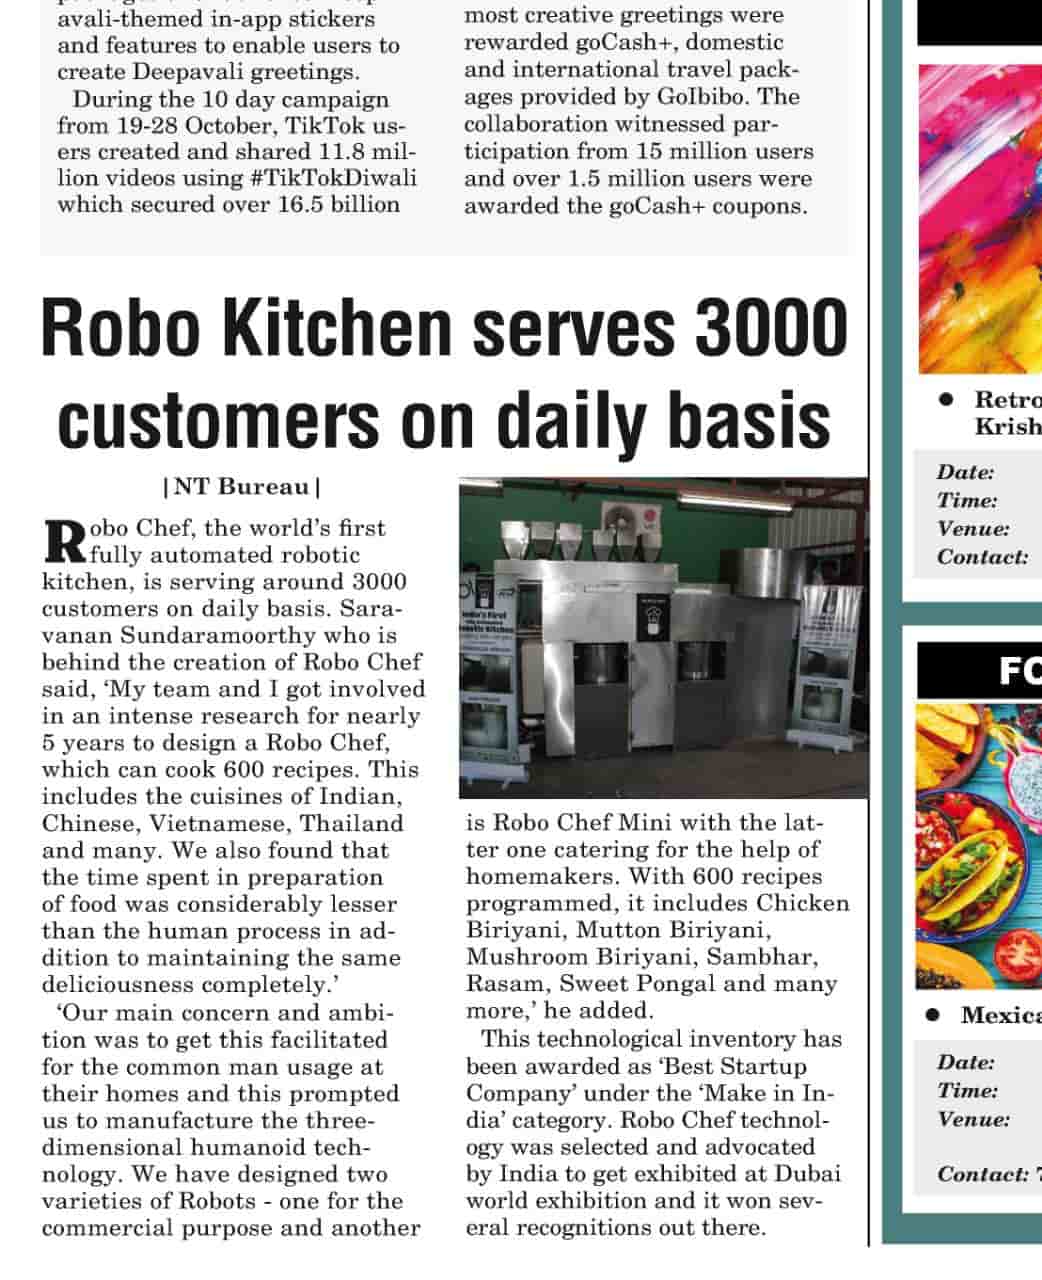 Robo Kitchen Serves 3000 Customers daily